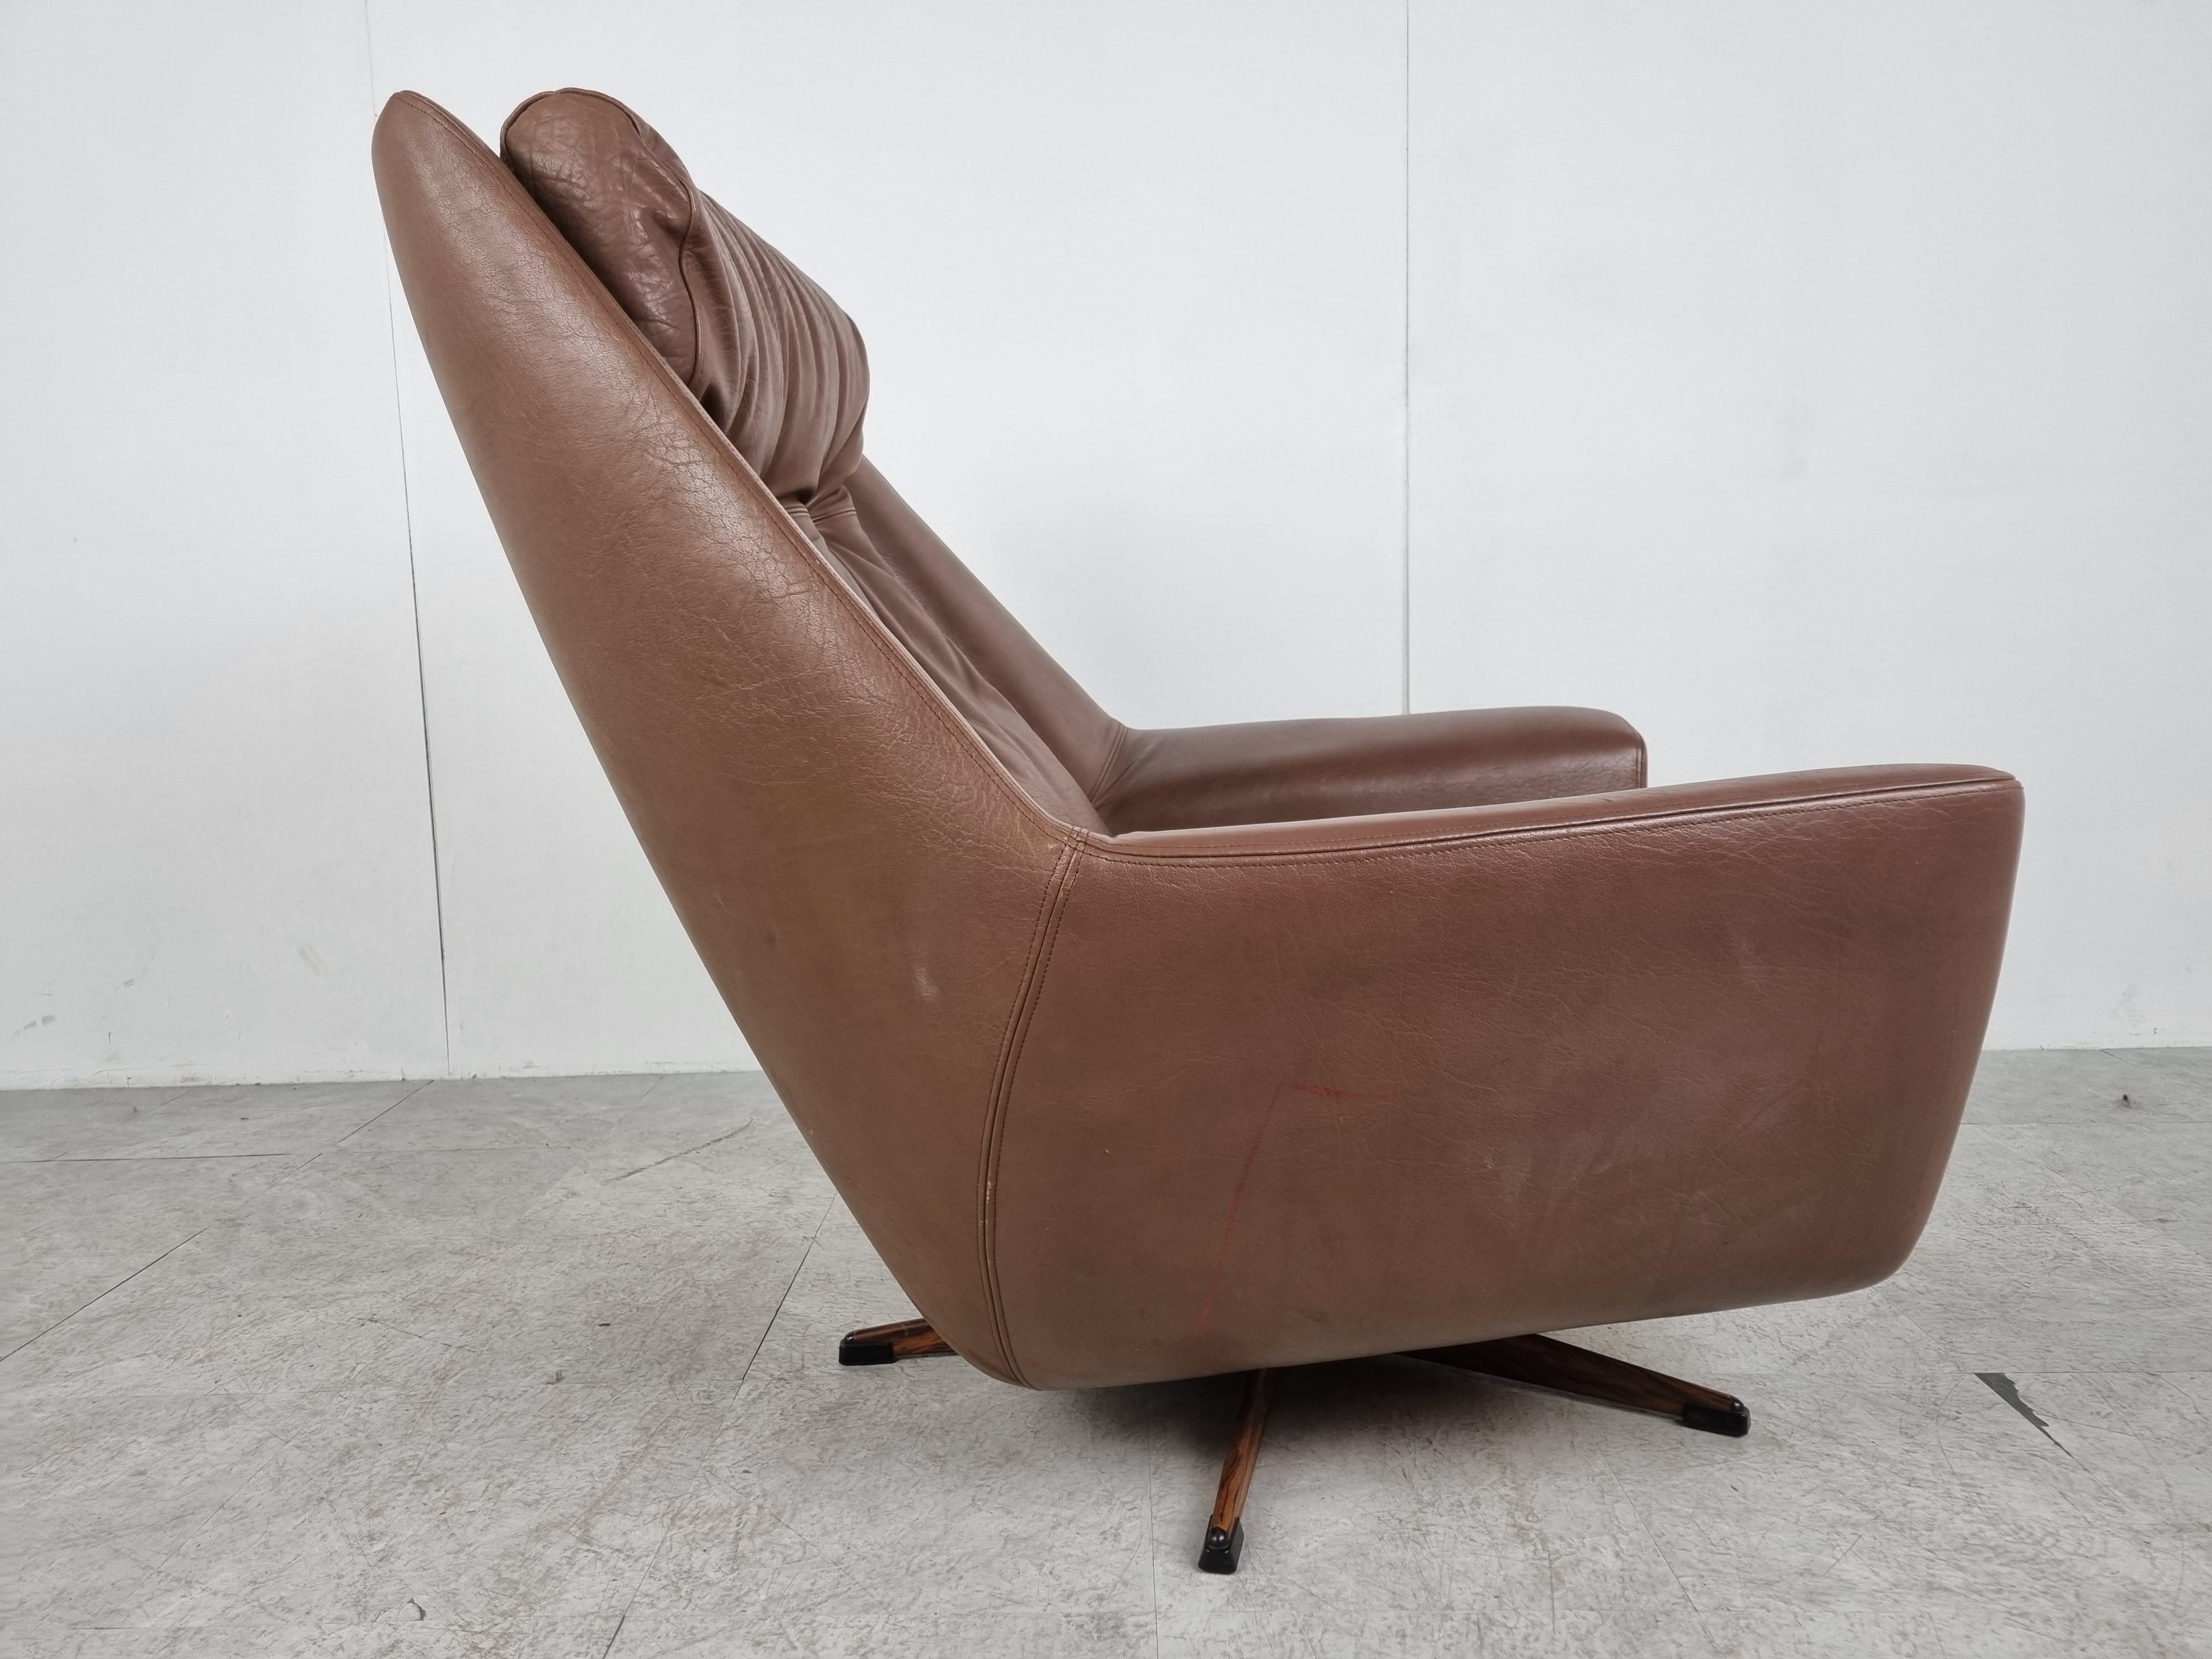 Leather Vintage leather swivel chair, 1970s